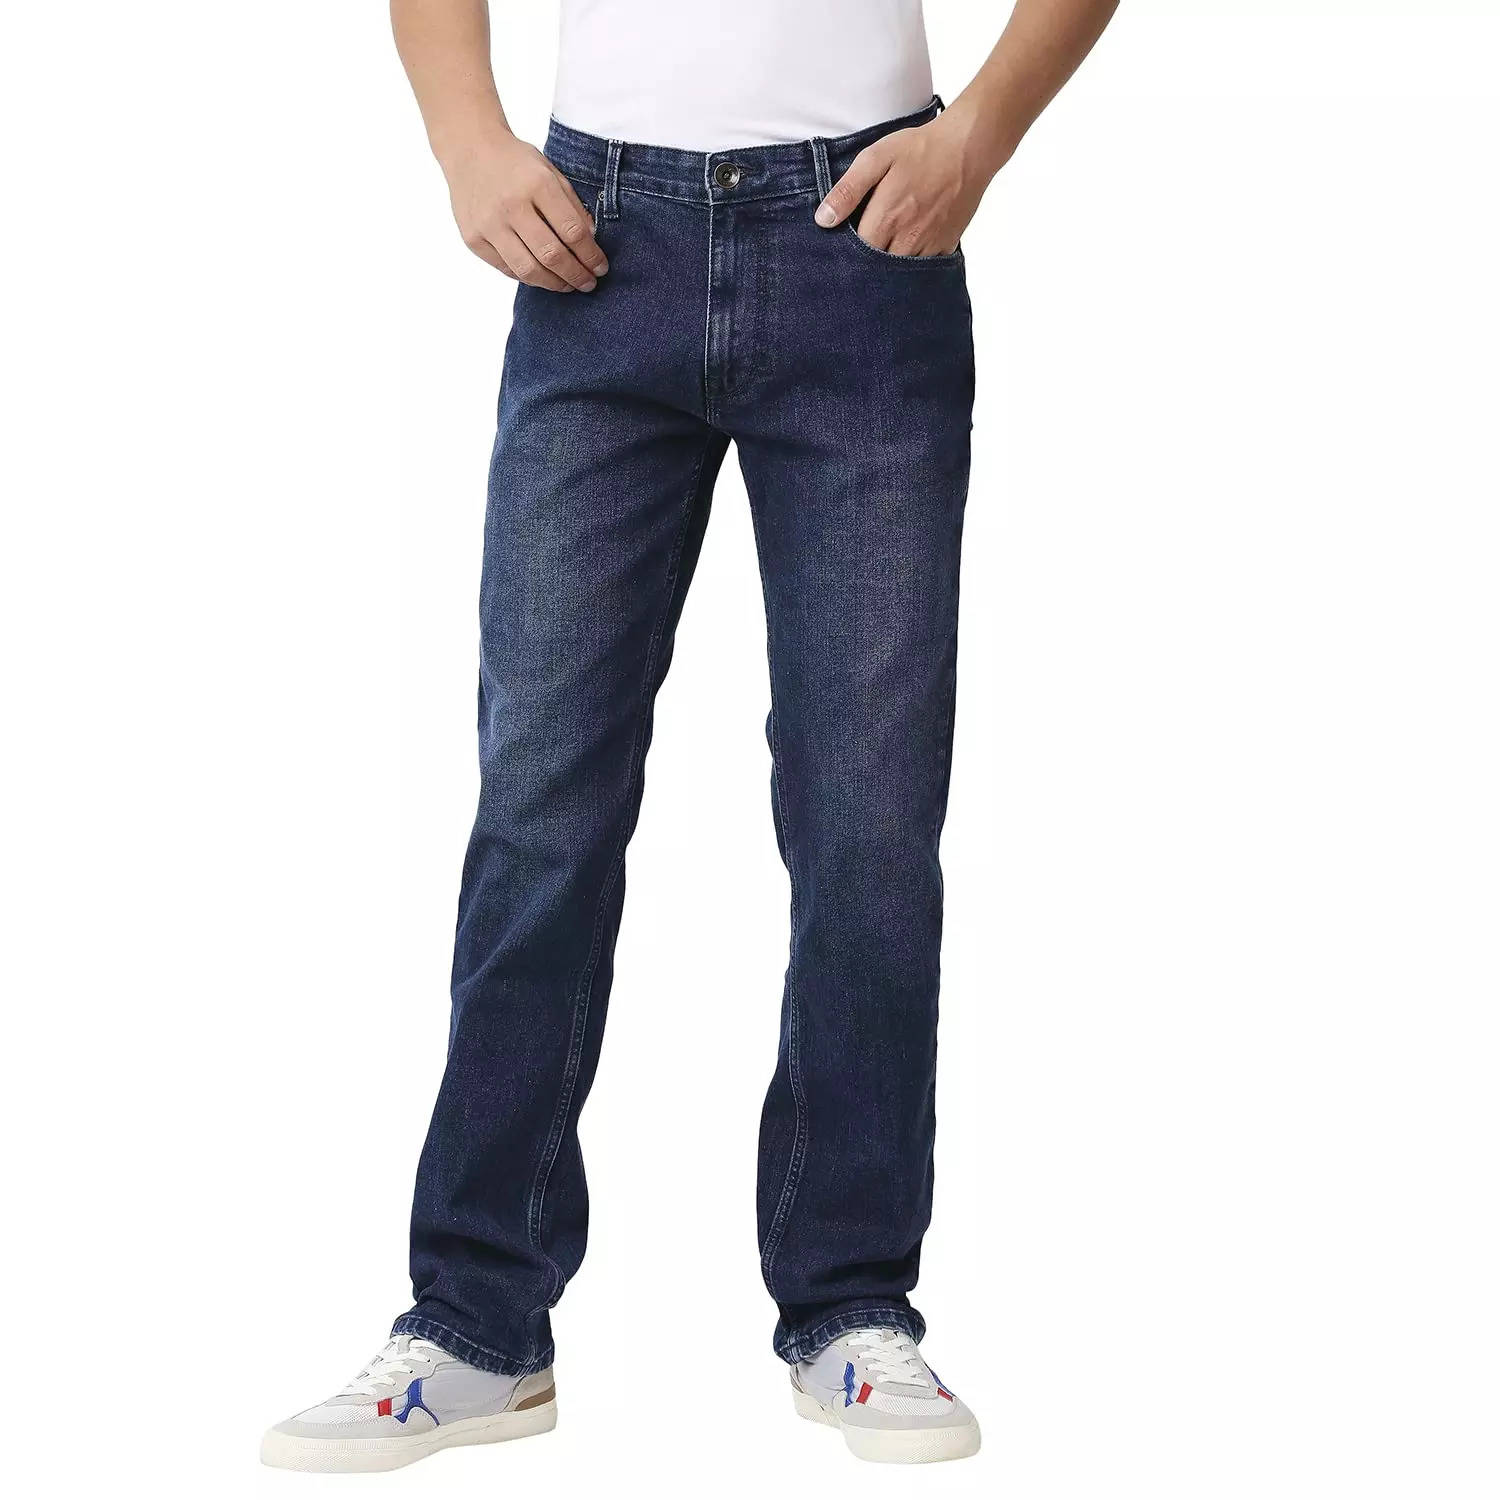 Buy Latest & Stylish Jeans for Men Online - Pepe Jeans India